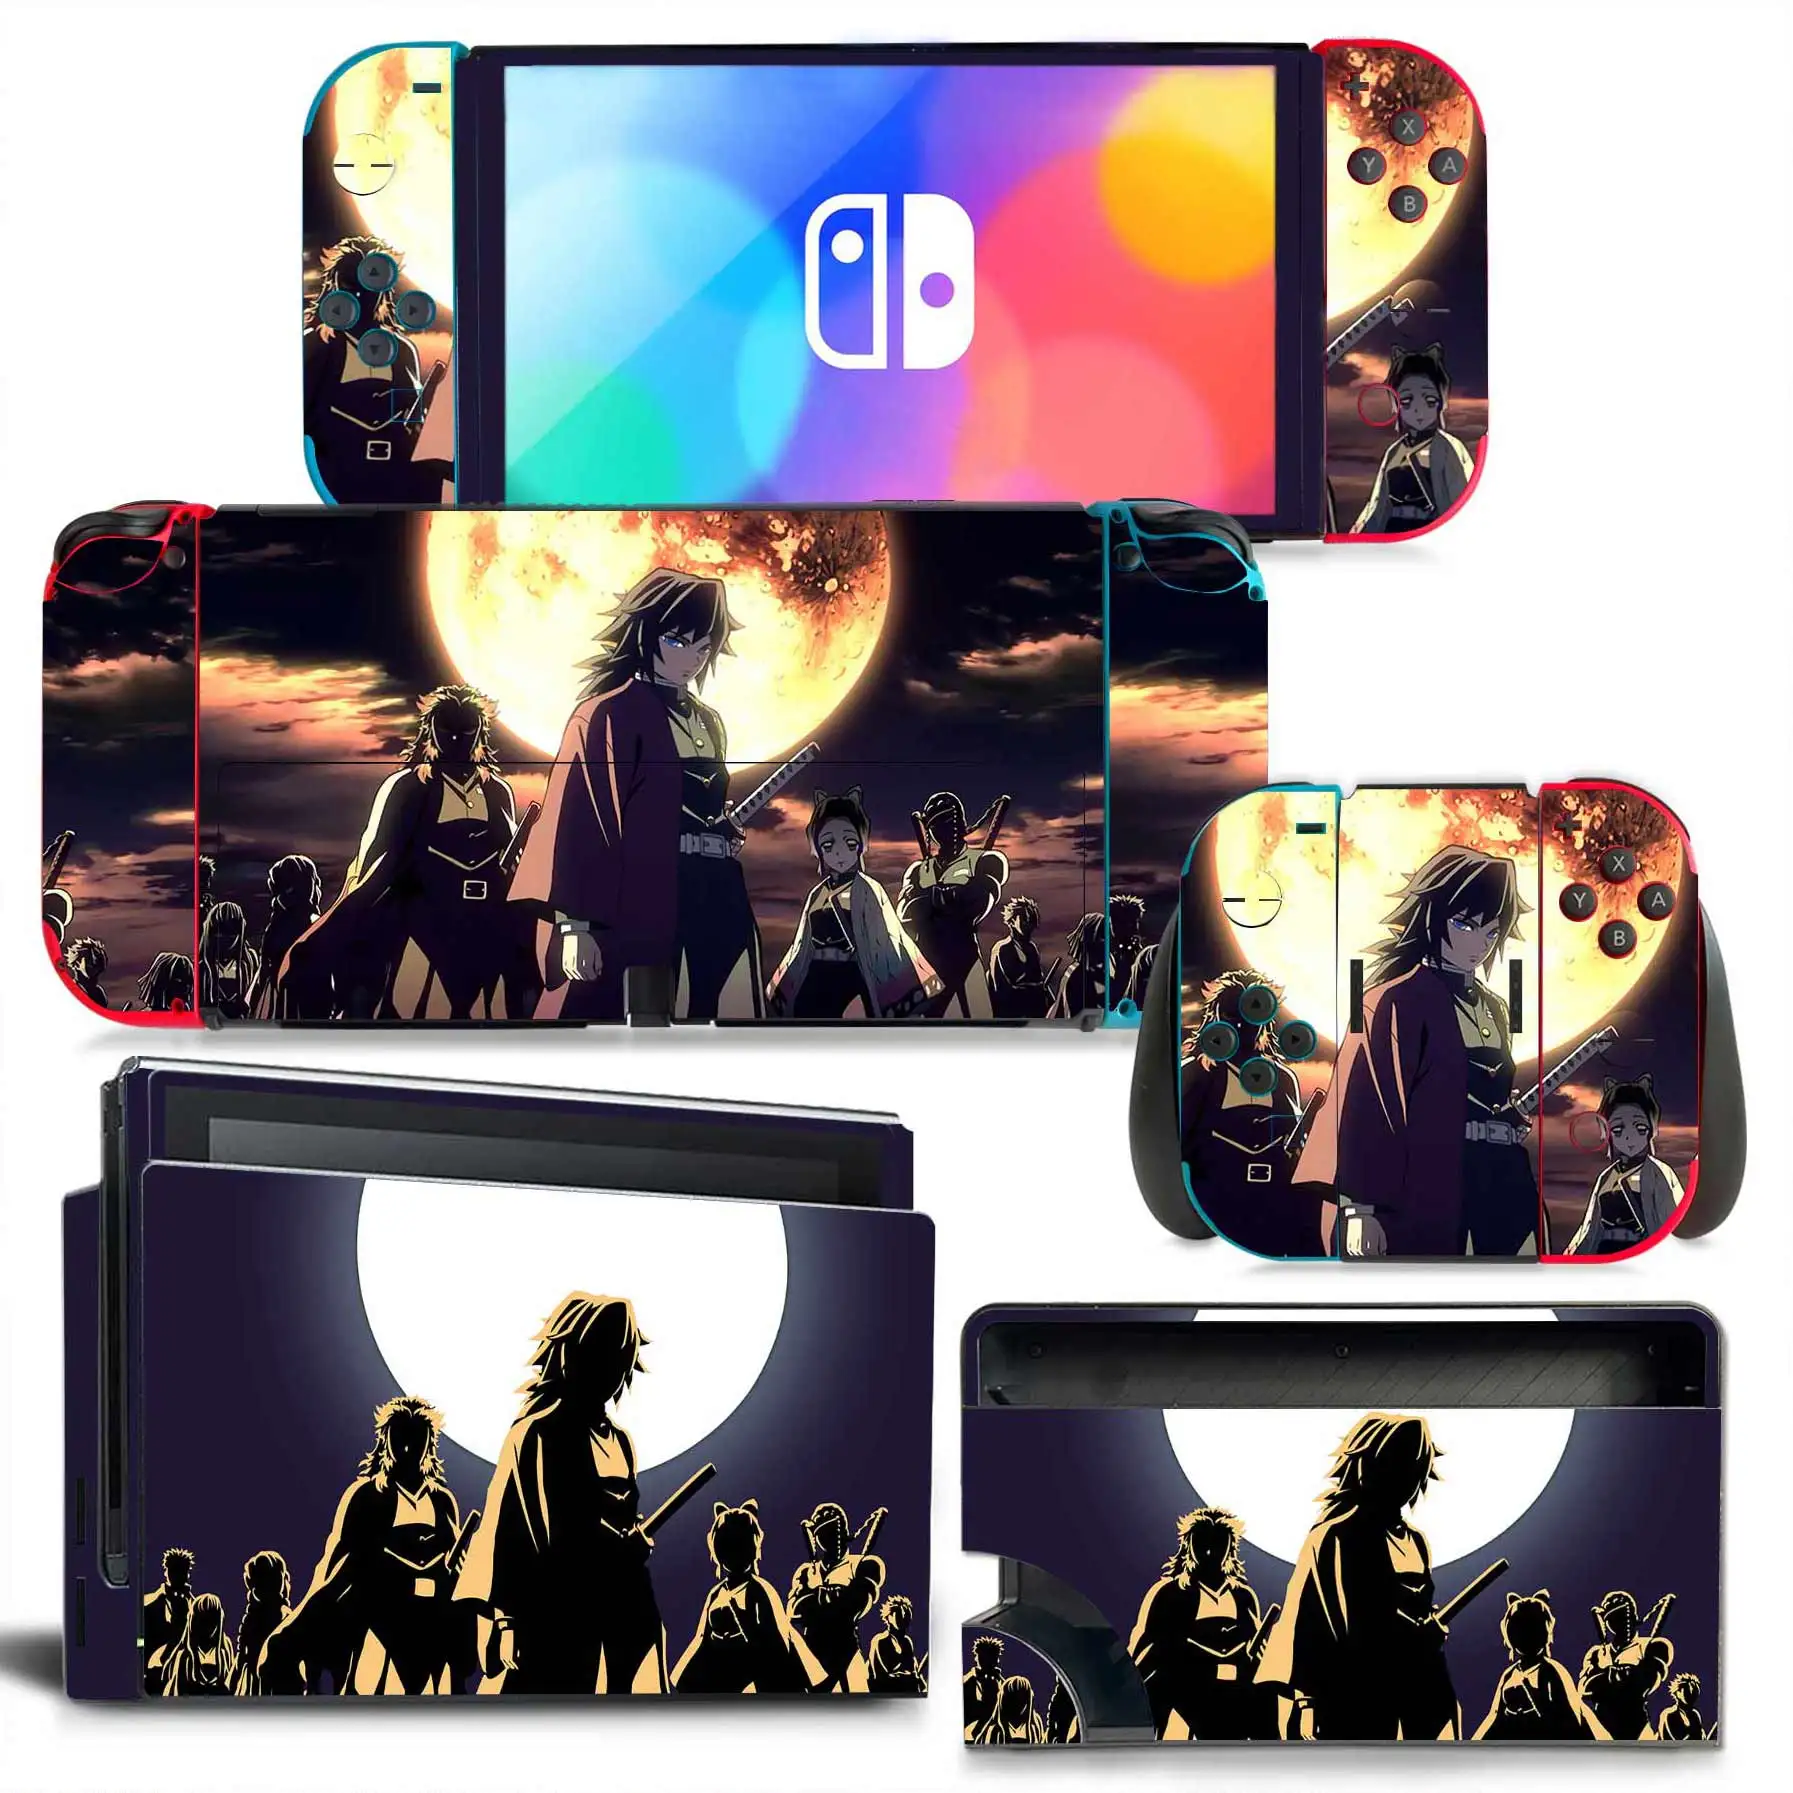 Demon 1676 Switch Oled Skin Sticker Decal Cover for Switch Oled Console Skin Dock Joy Con Wrap Full Wrap Decal NS OLED Vinyl